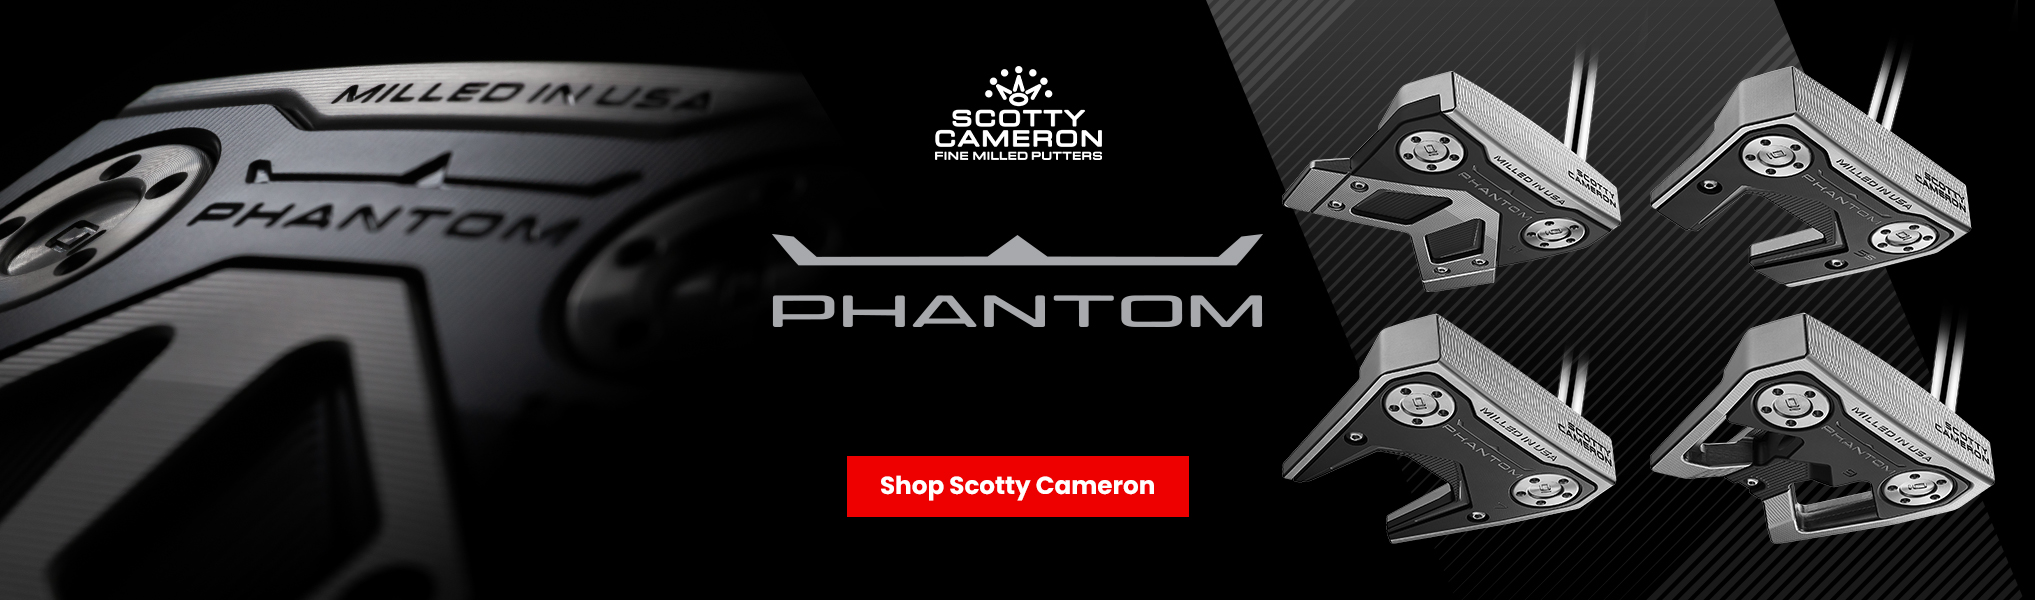 Scotty Cameron Putters